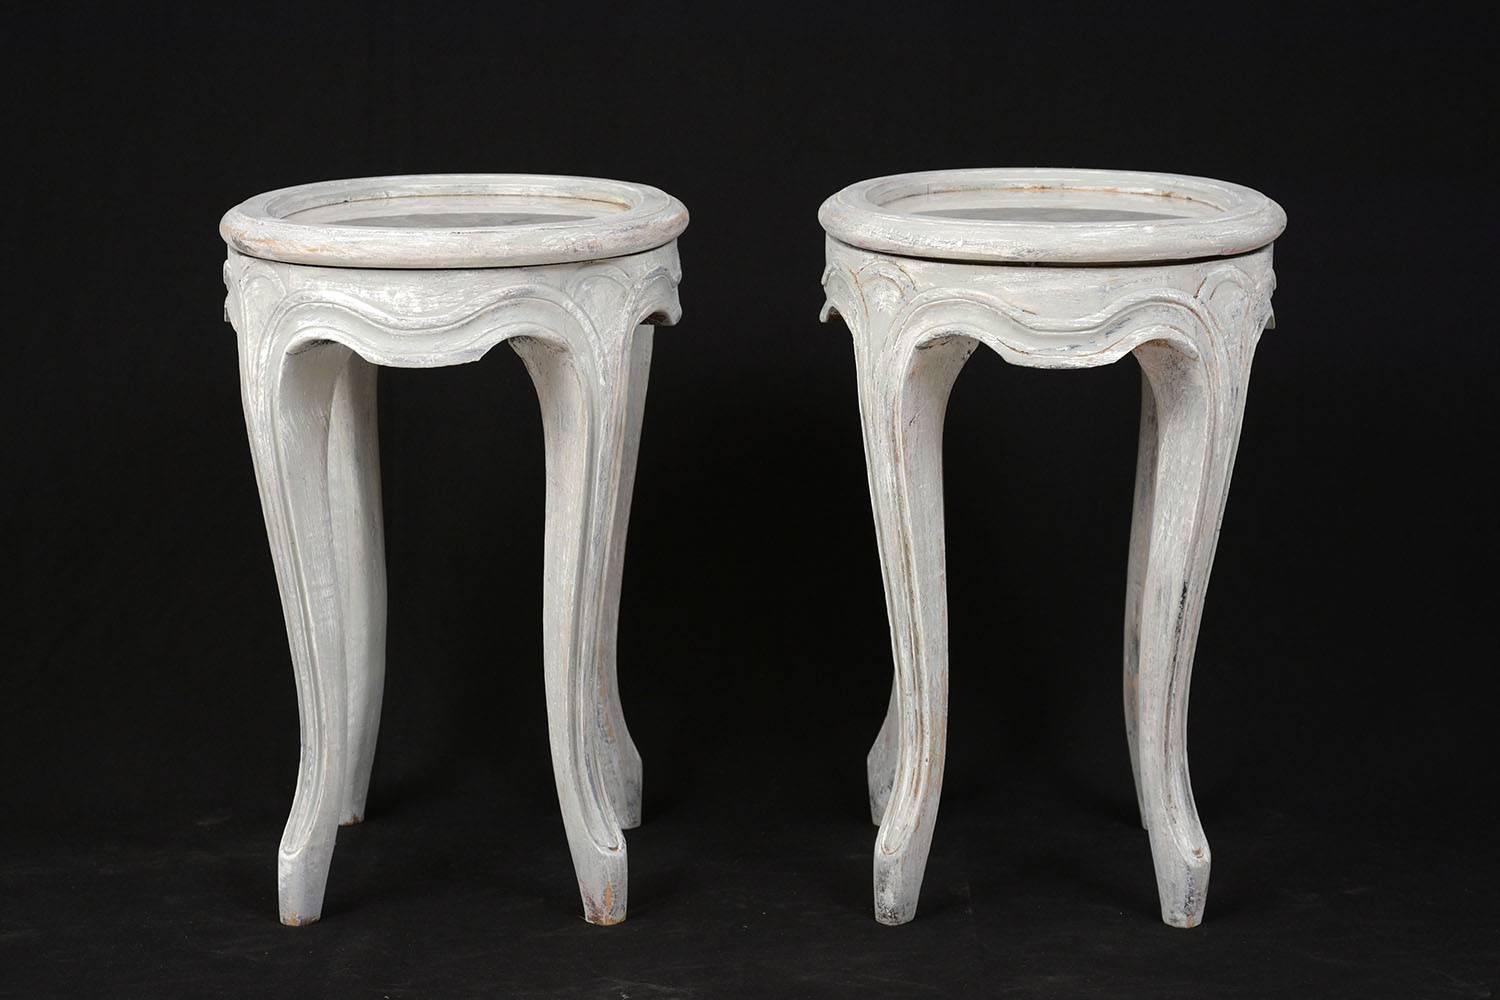 French Provincial Pair of Provincial-Style Painted Garden Stools